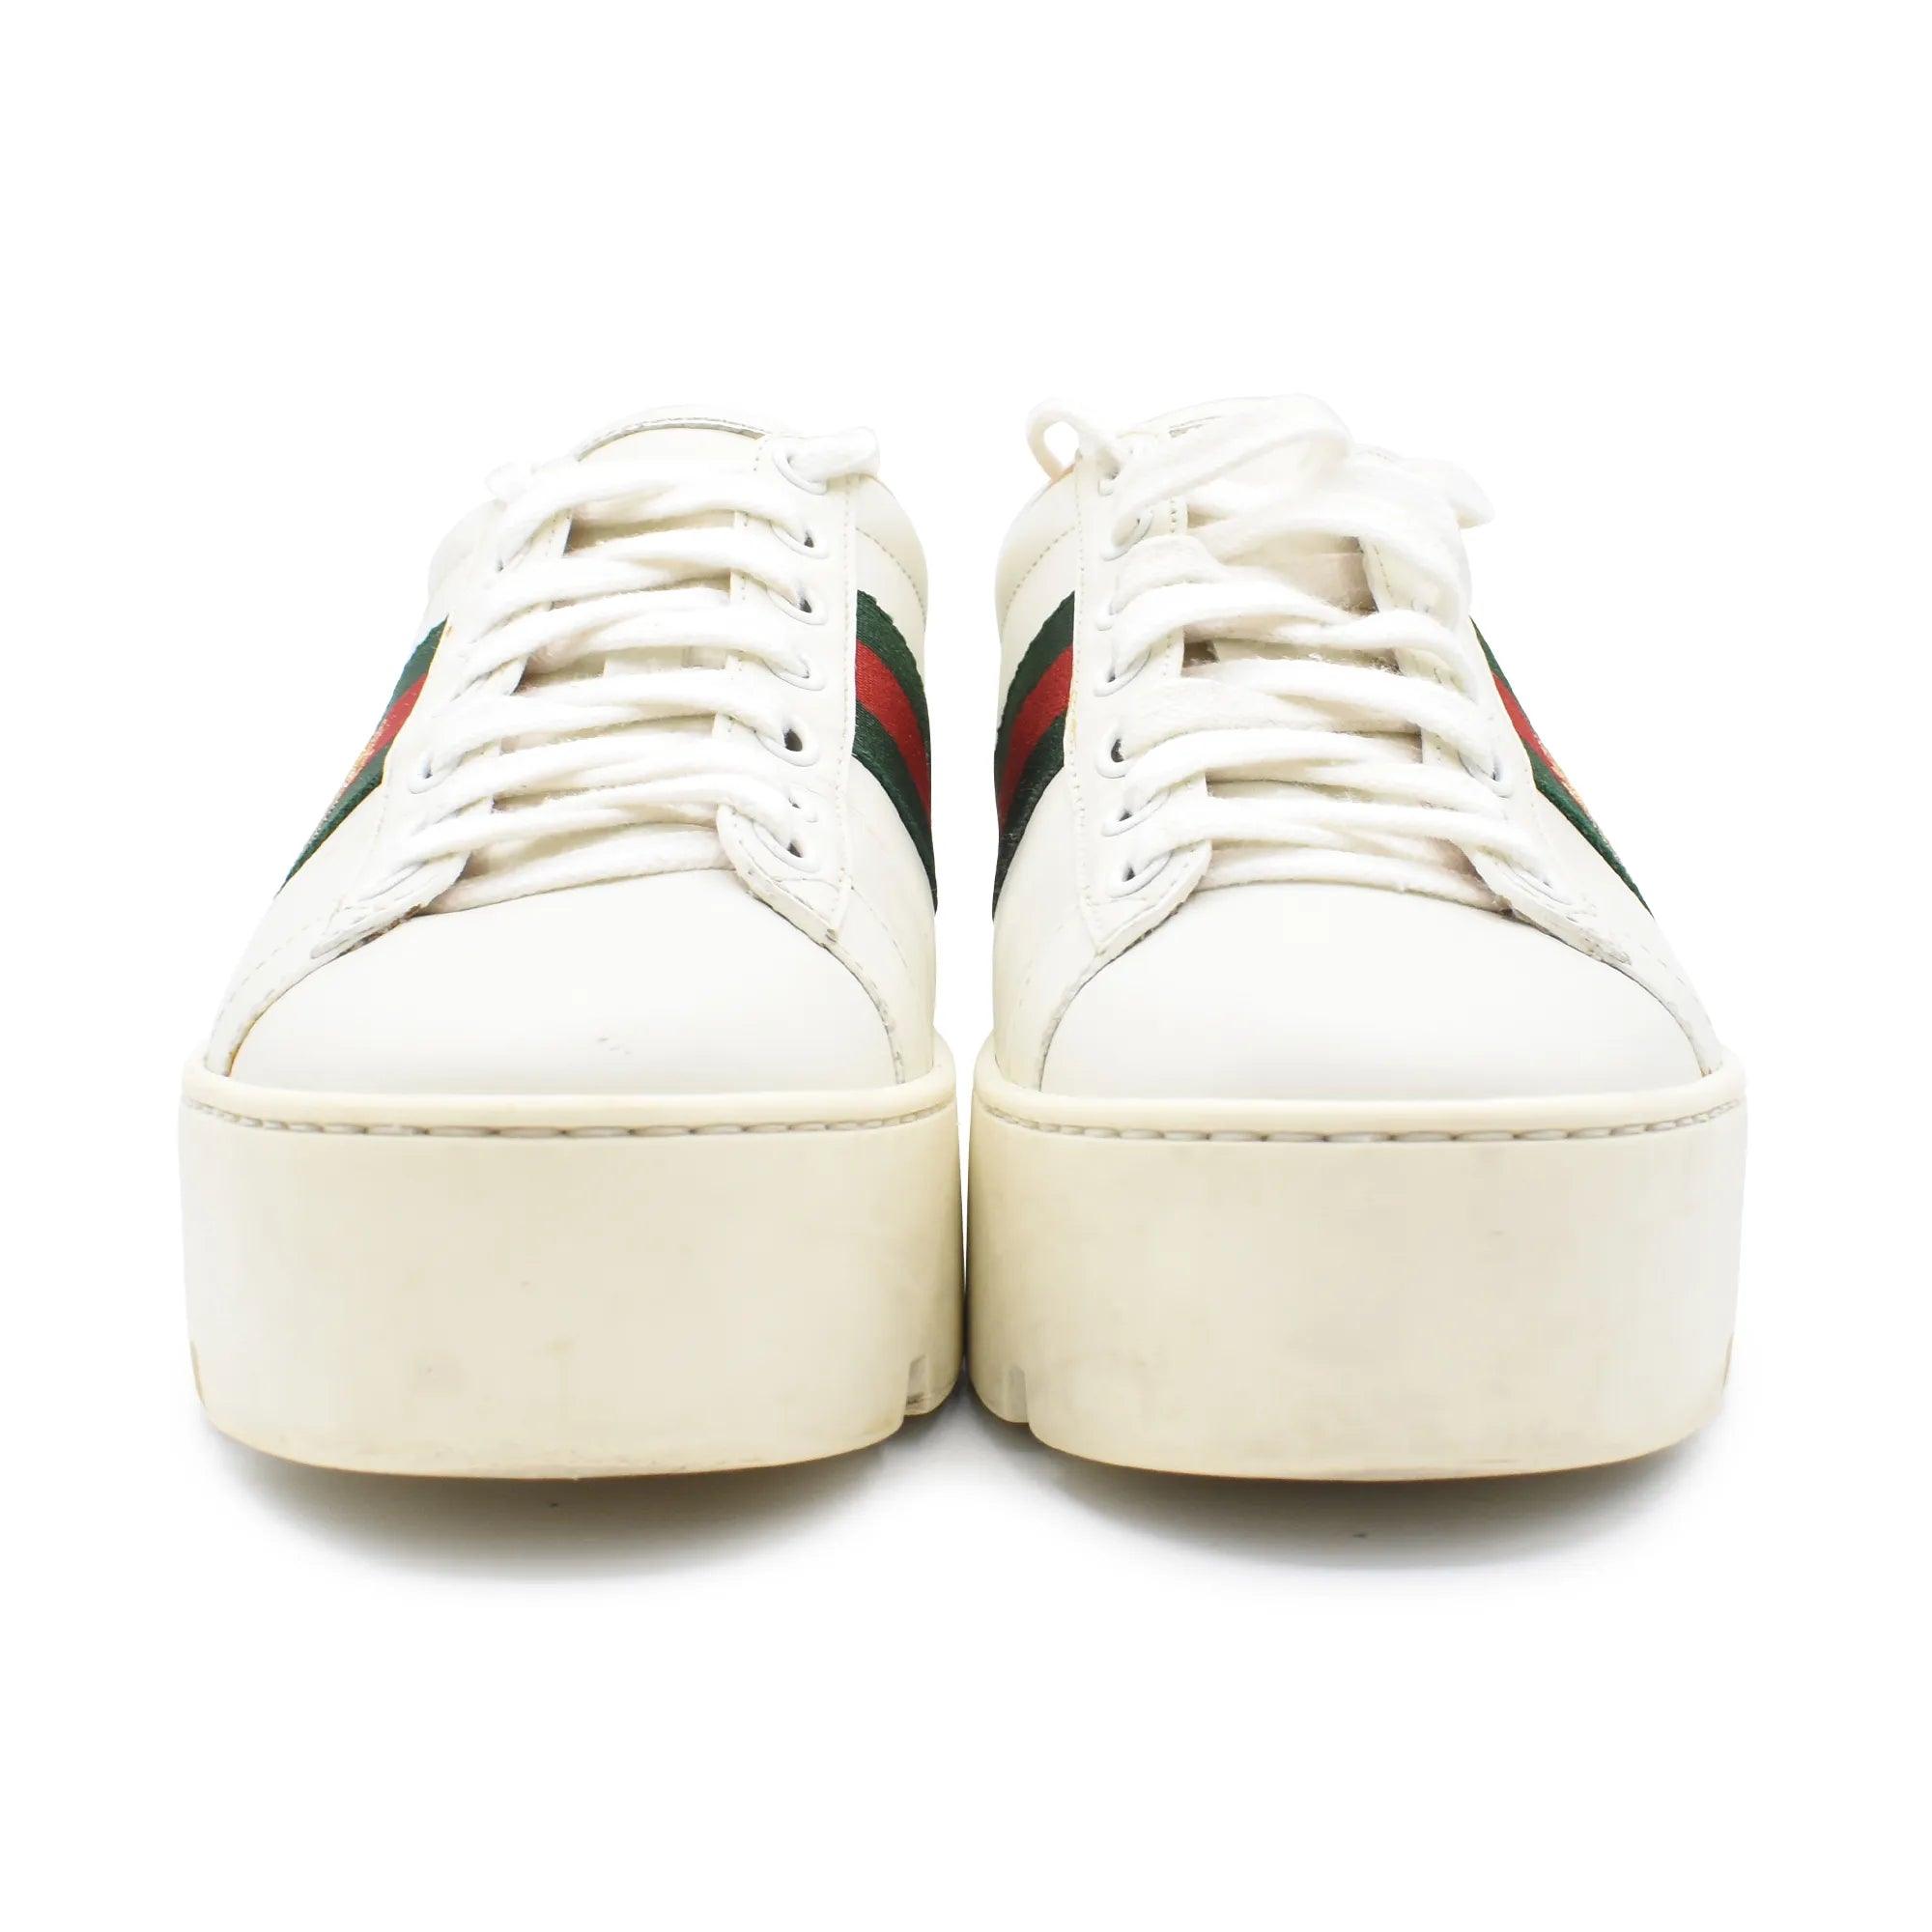 Gucci Platform Sneakers - Women's 37 - Fashionably Yours